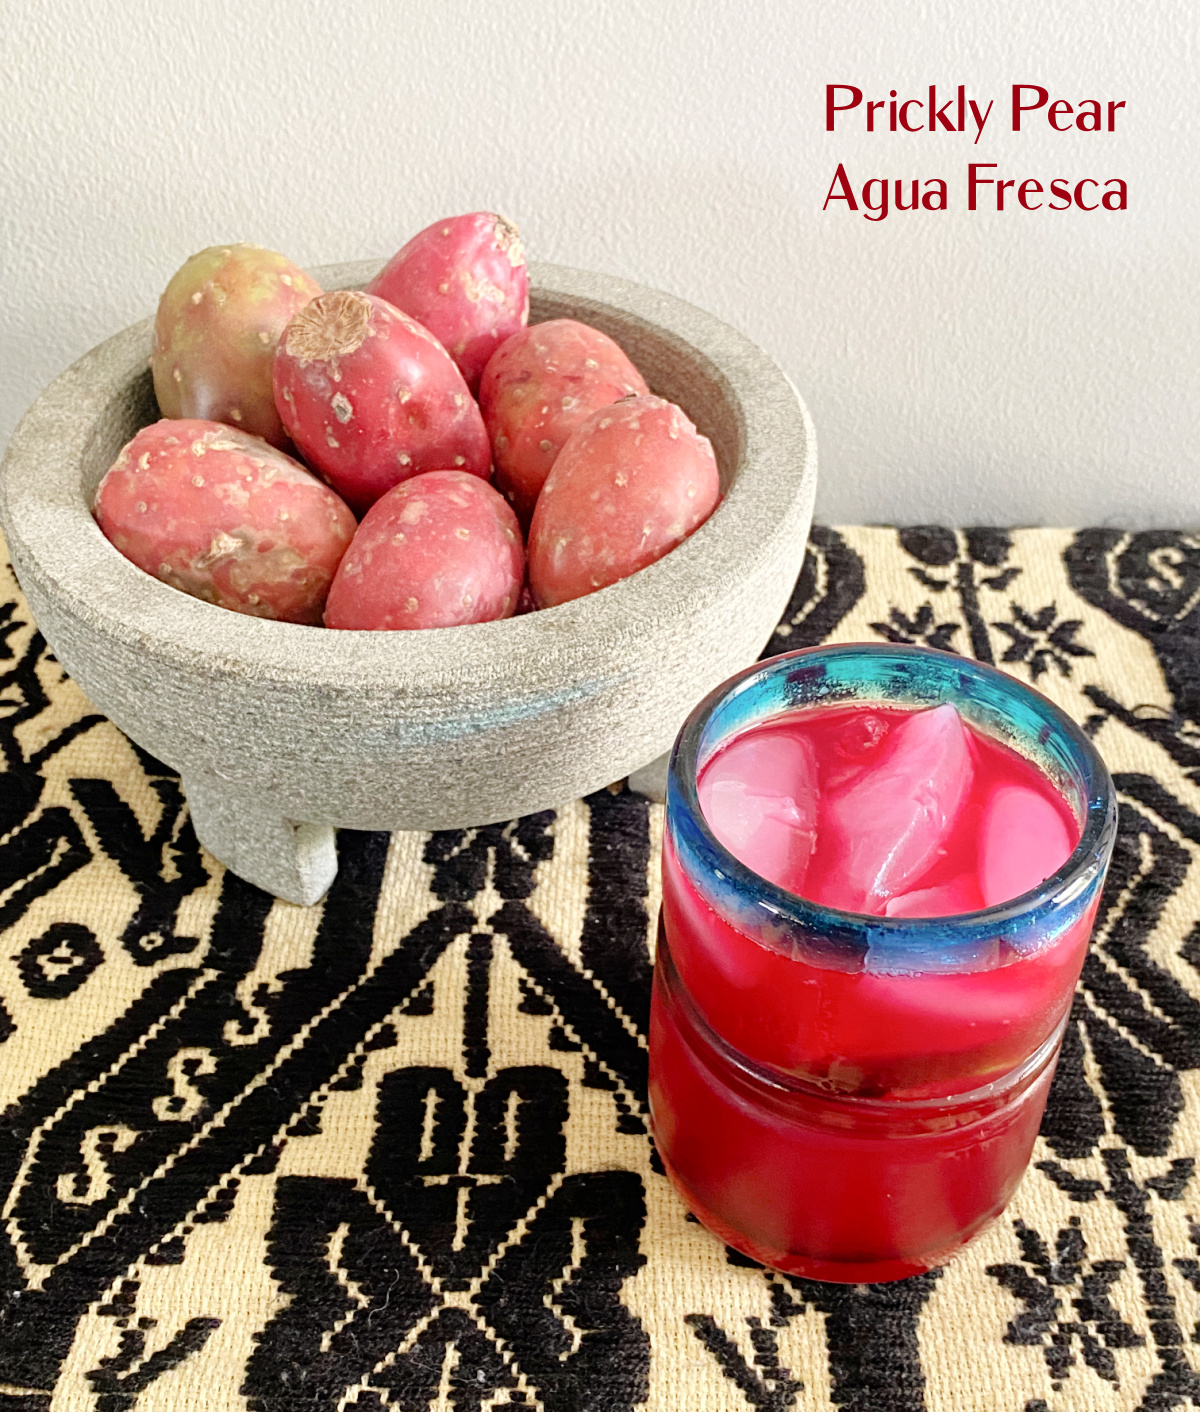 Prickly Pear Agua Fresca by LatinoFoodie